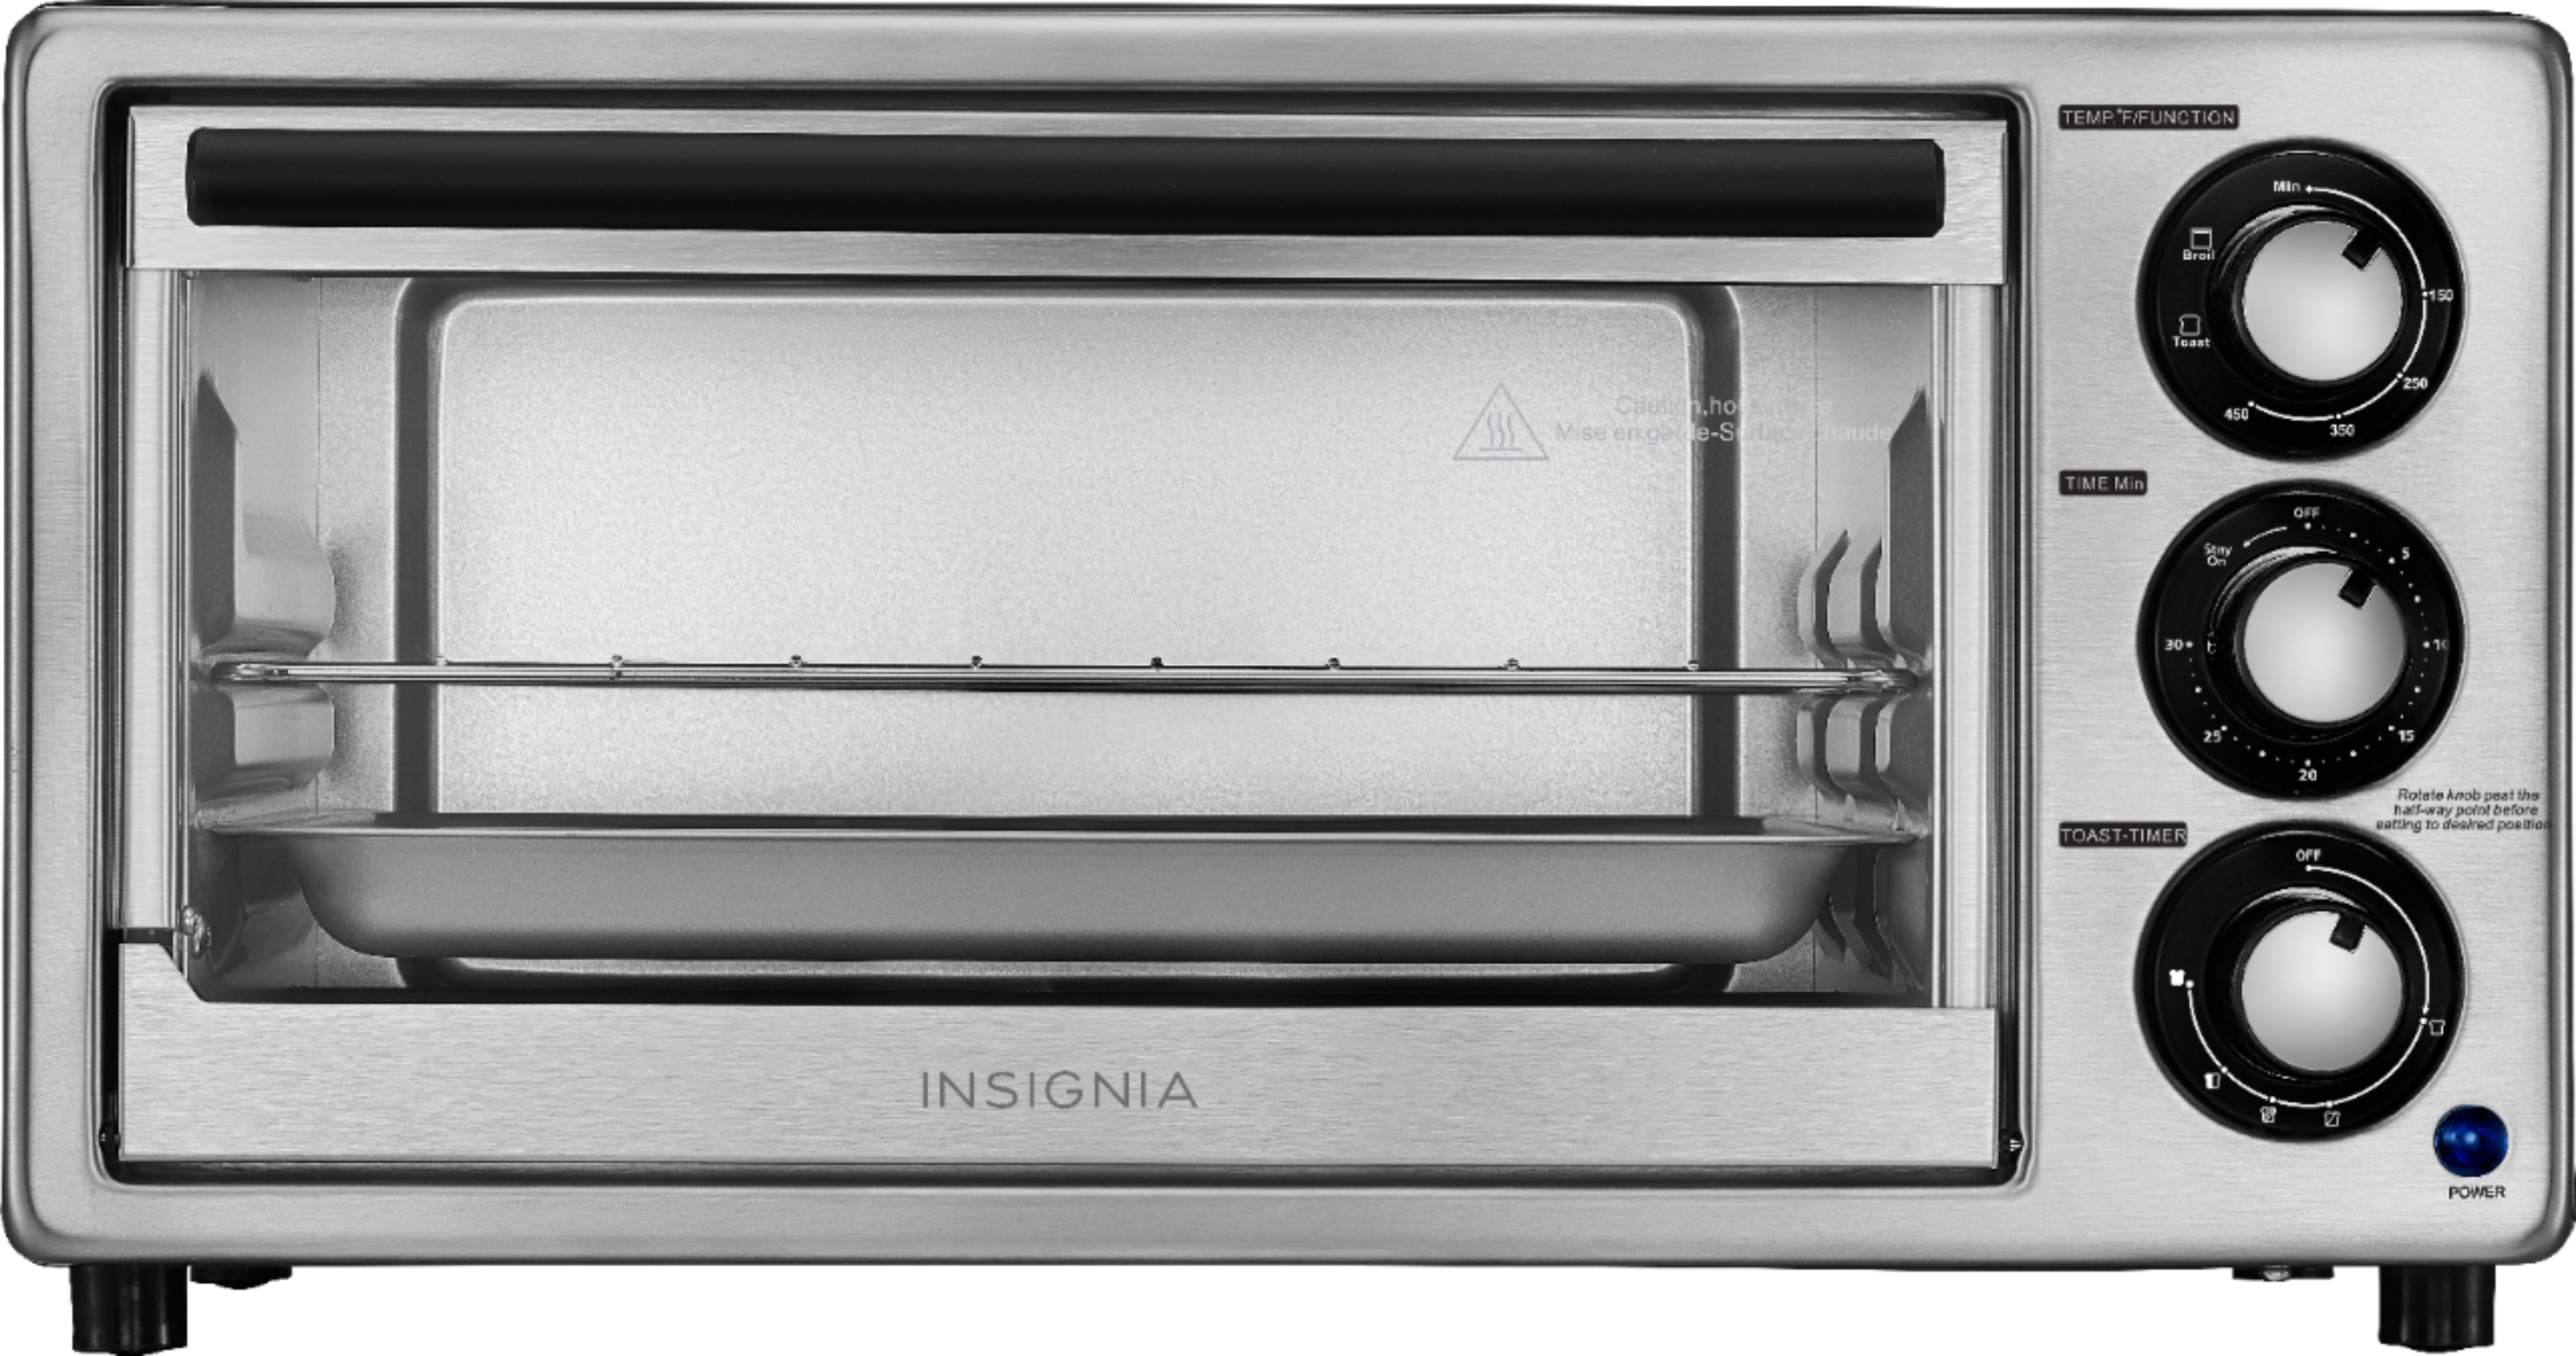 4 signs it's time to replace your toaster oven - CNET